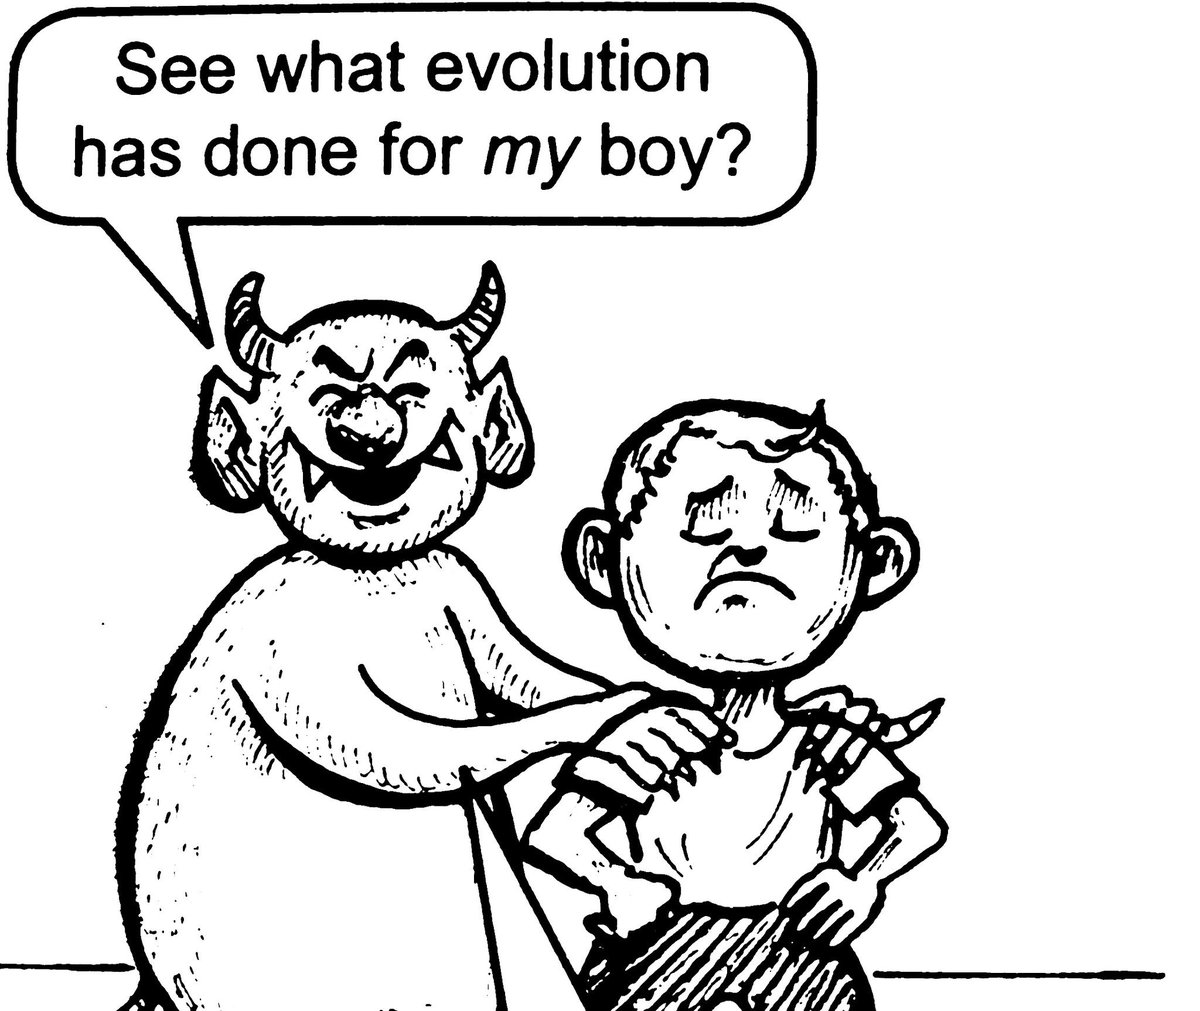 No Context Chick Tracts (@No_Context_JTC) on Twitter photo 2023-12-30 17:54:21